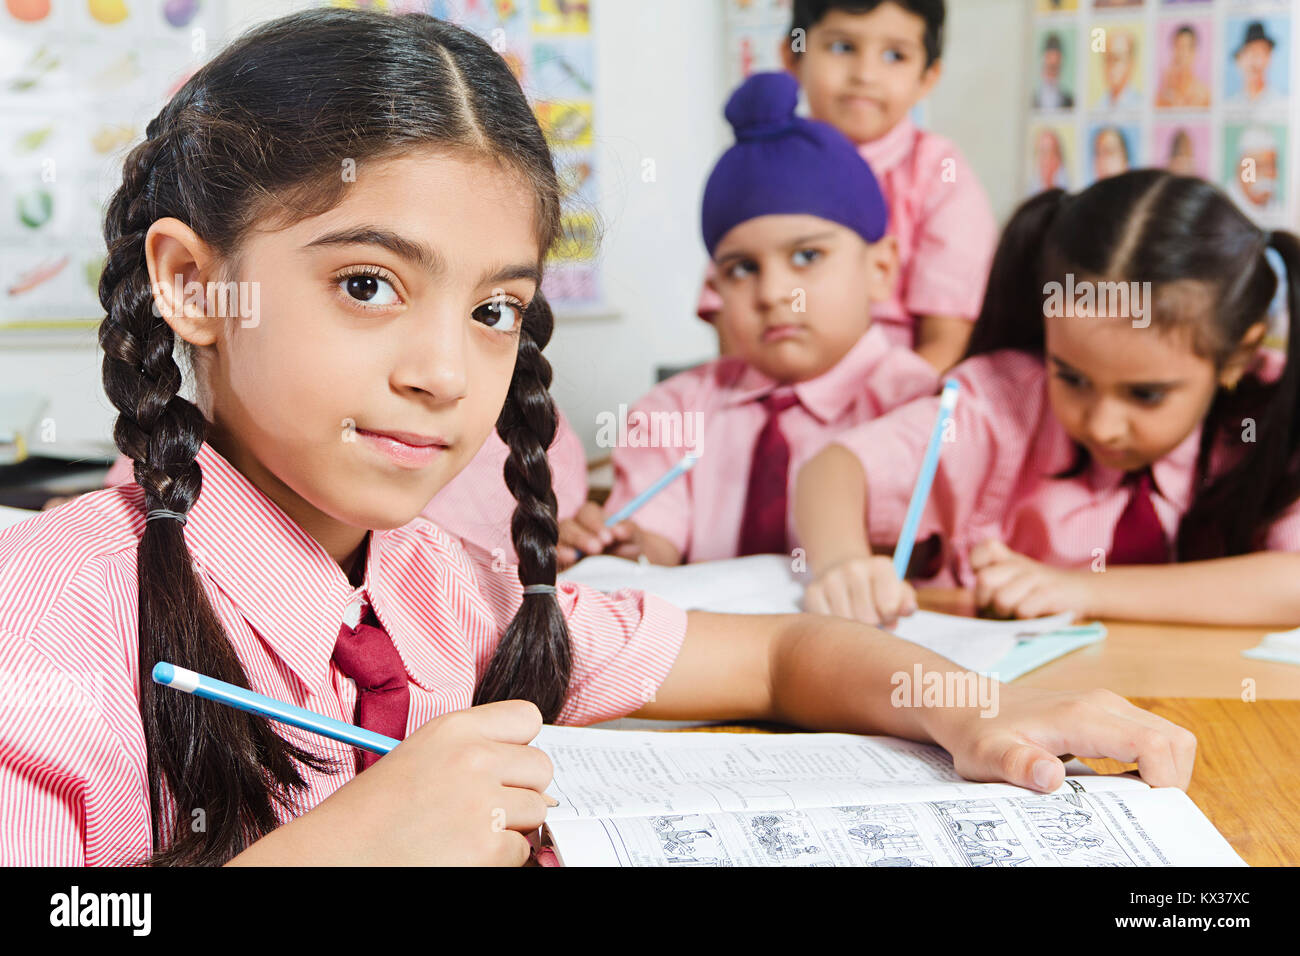 Indian School Kids Students Notebook Writing Study Education In Class Stock Photo